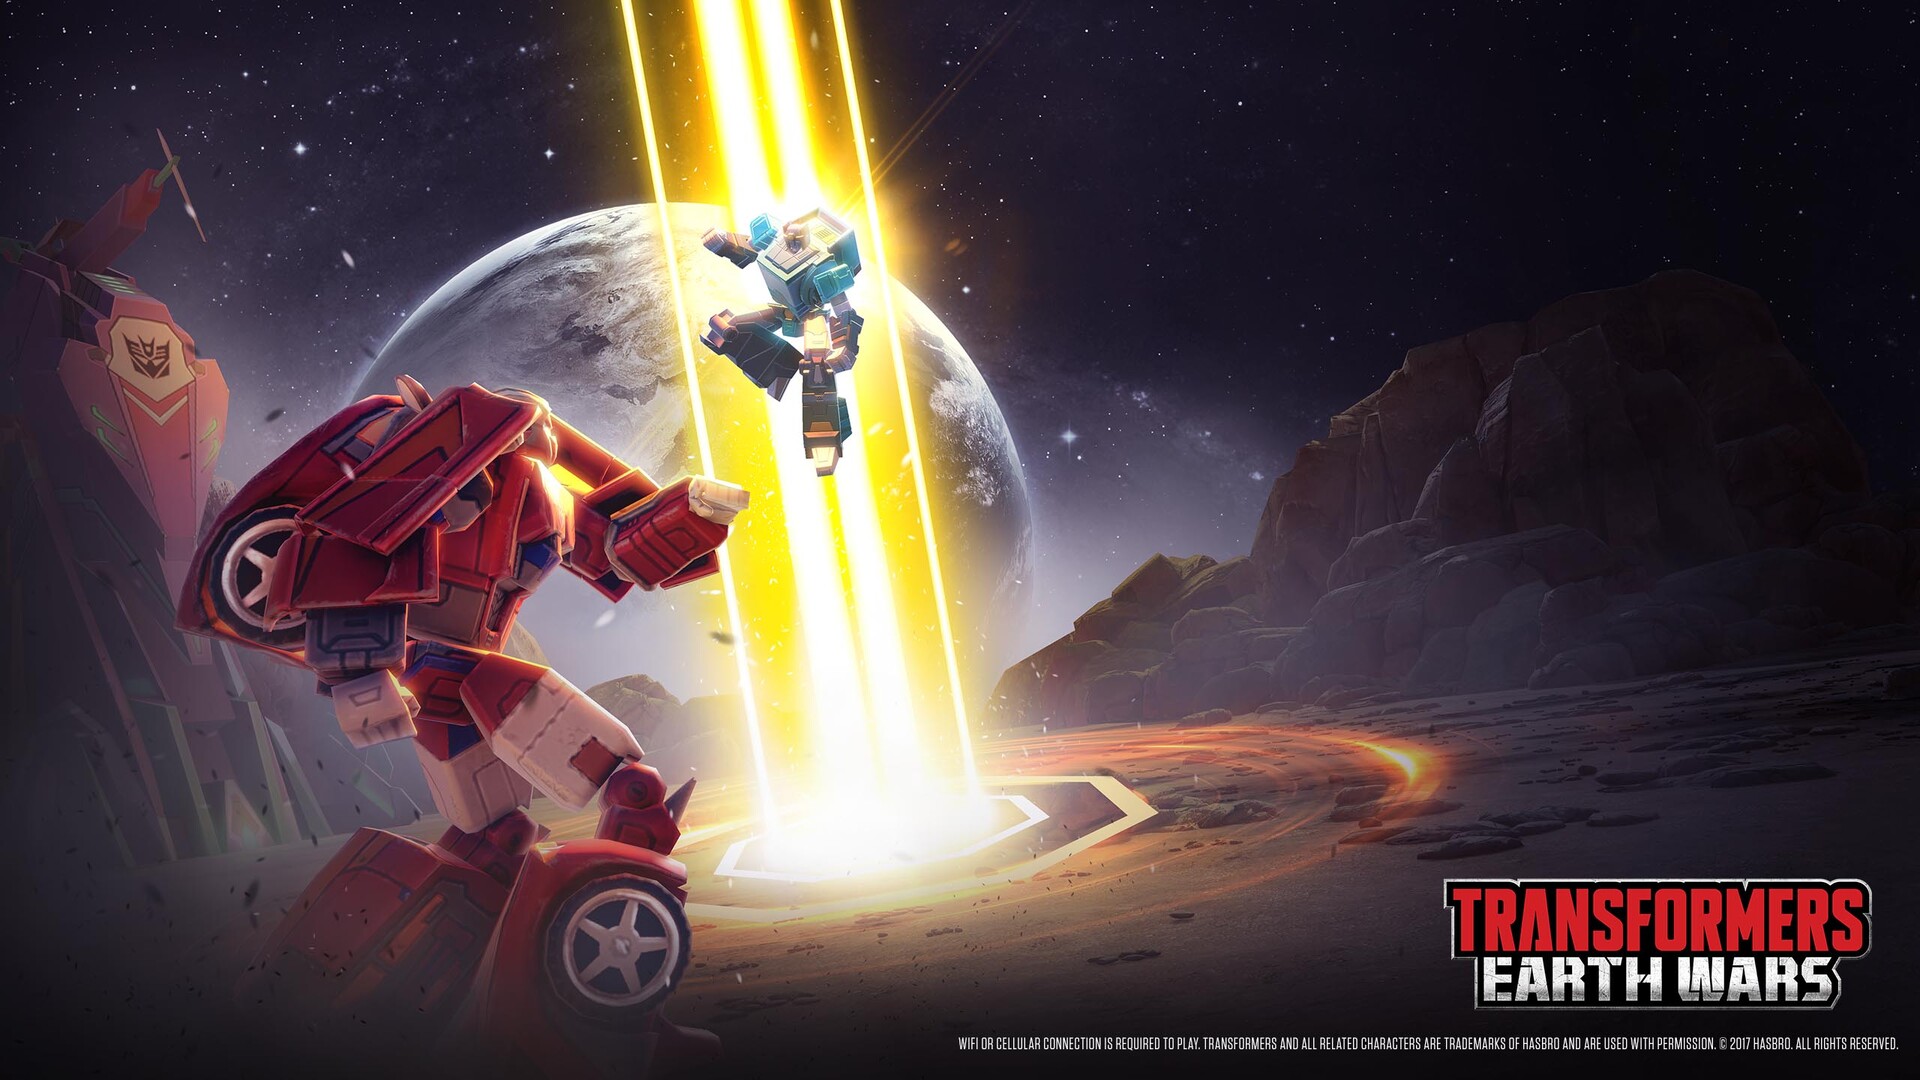 Transformers: Earth Wars Wins Game Of The Year 2016 At TIGA Awards